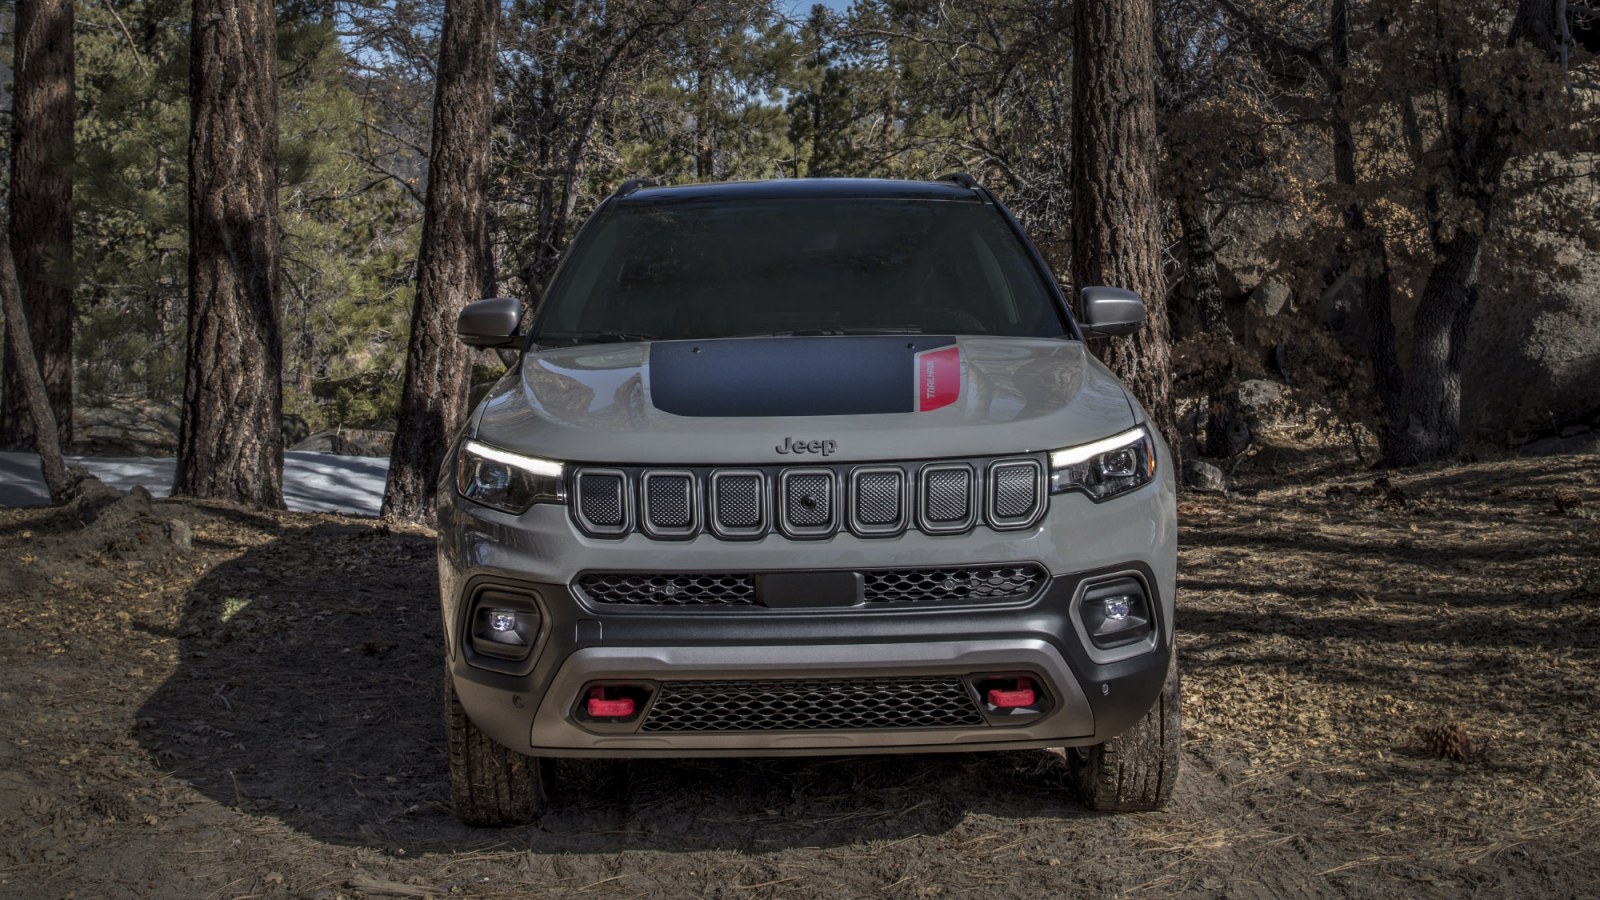 Jeep Gives 2022 Compass Mid-Generation Upgrade With a Refined Interior,  High-Tech Features